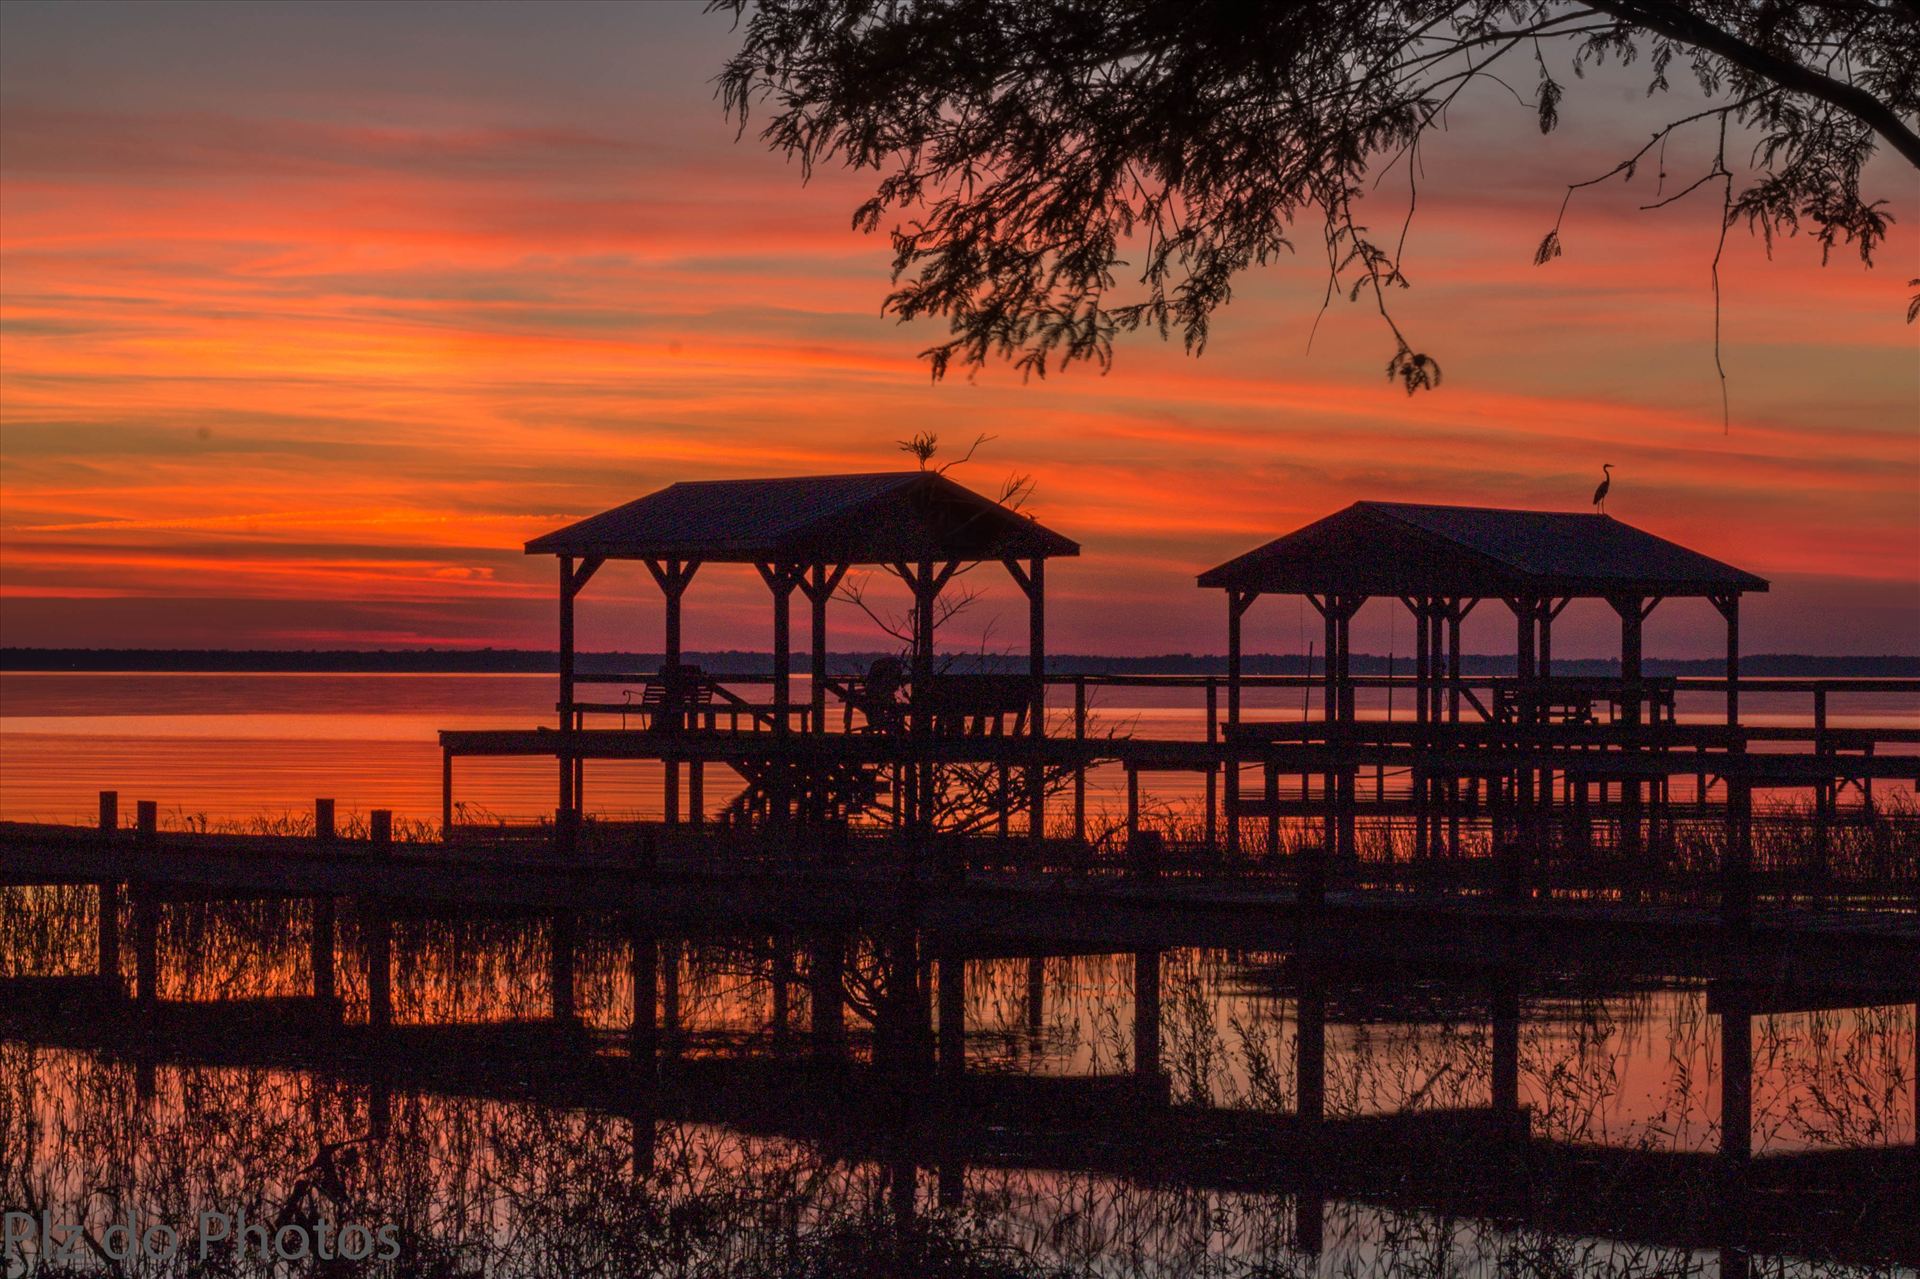 Autumn Sunset (1 of 1).jpg Autumn sunset in Lake Waccamaw, NC. by Patricia Zyzyk